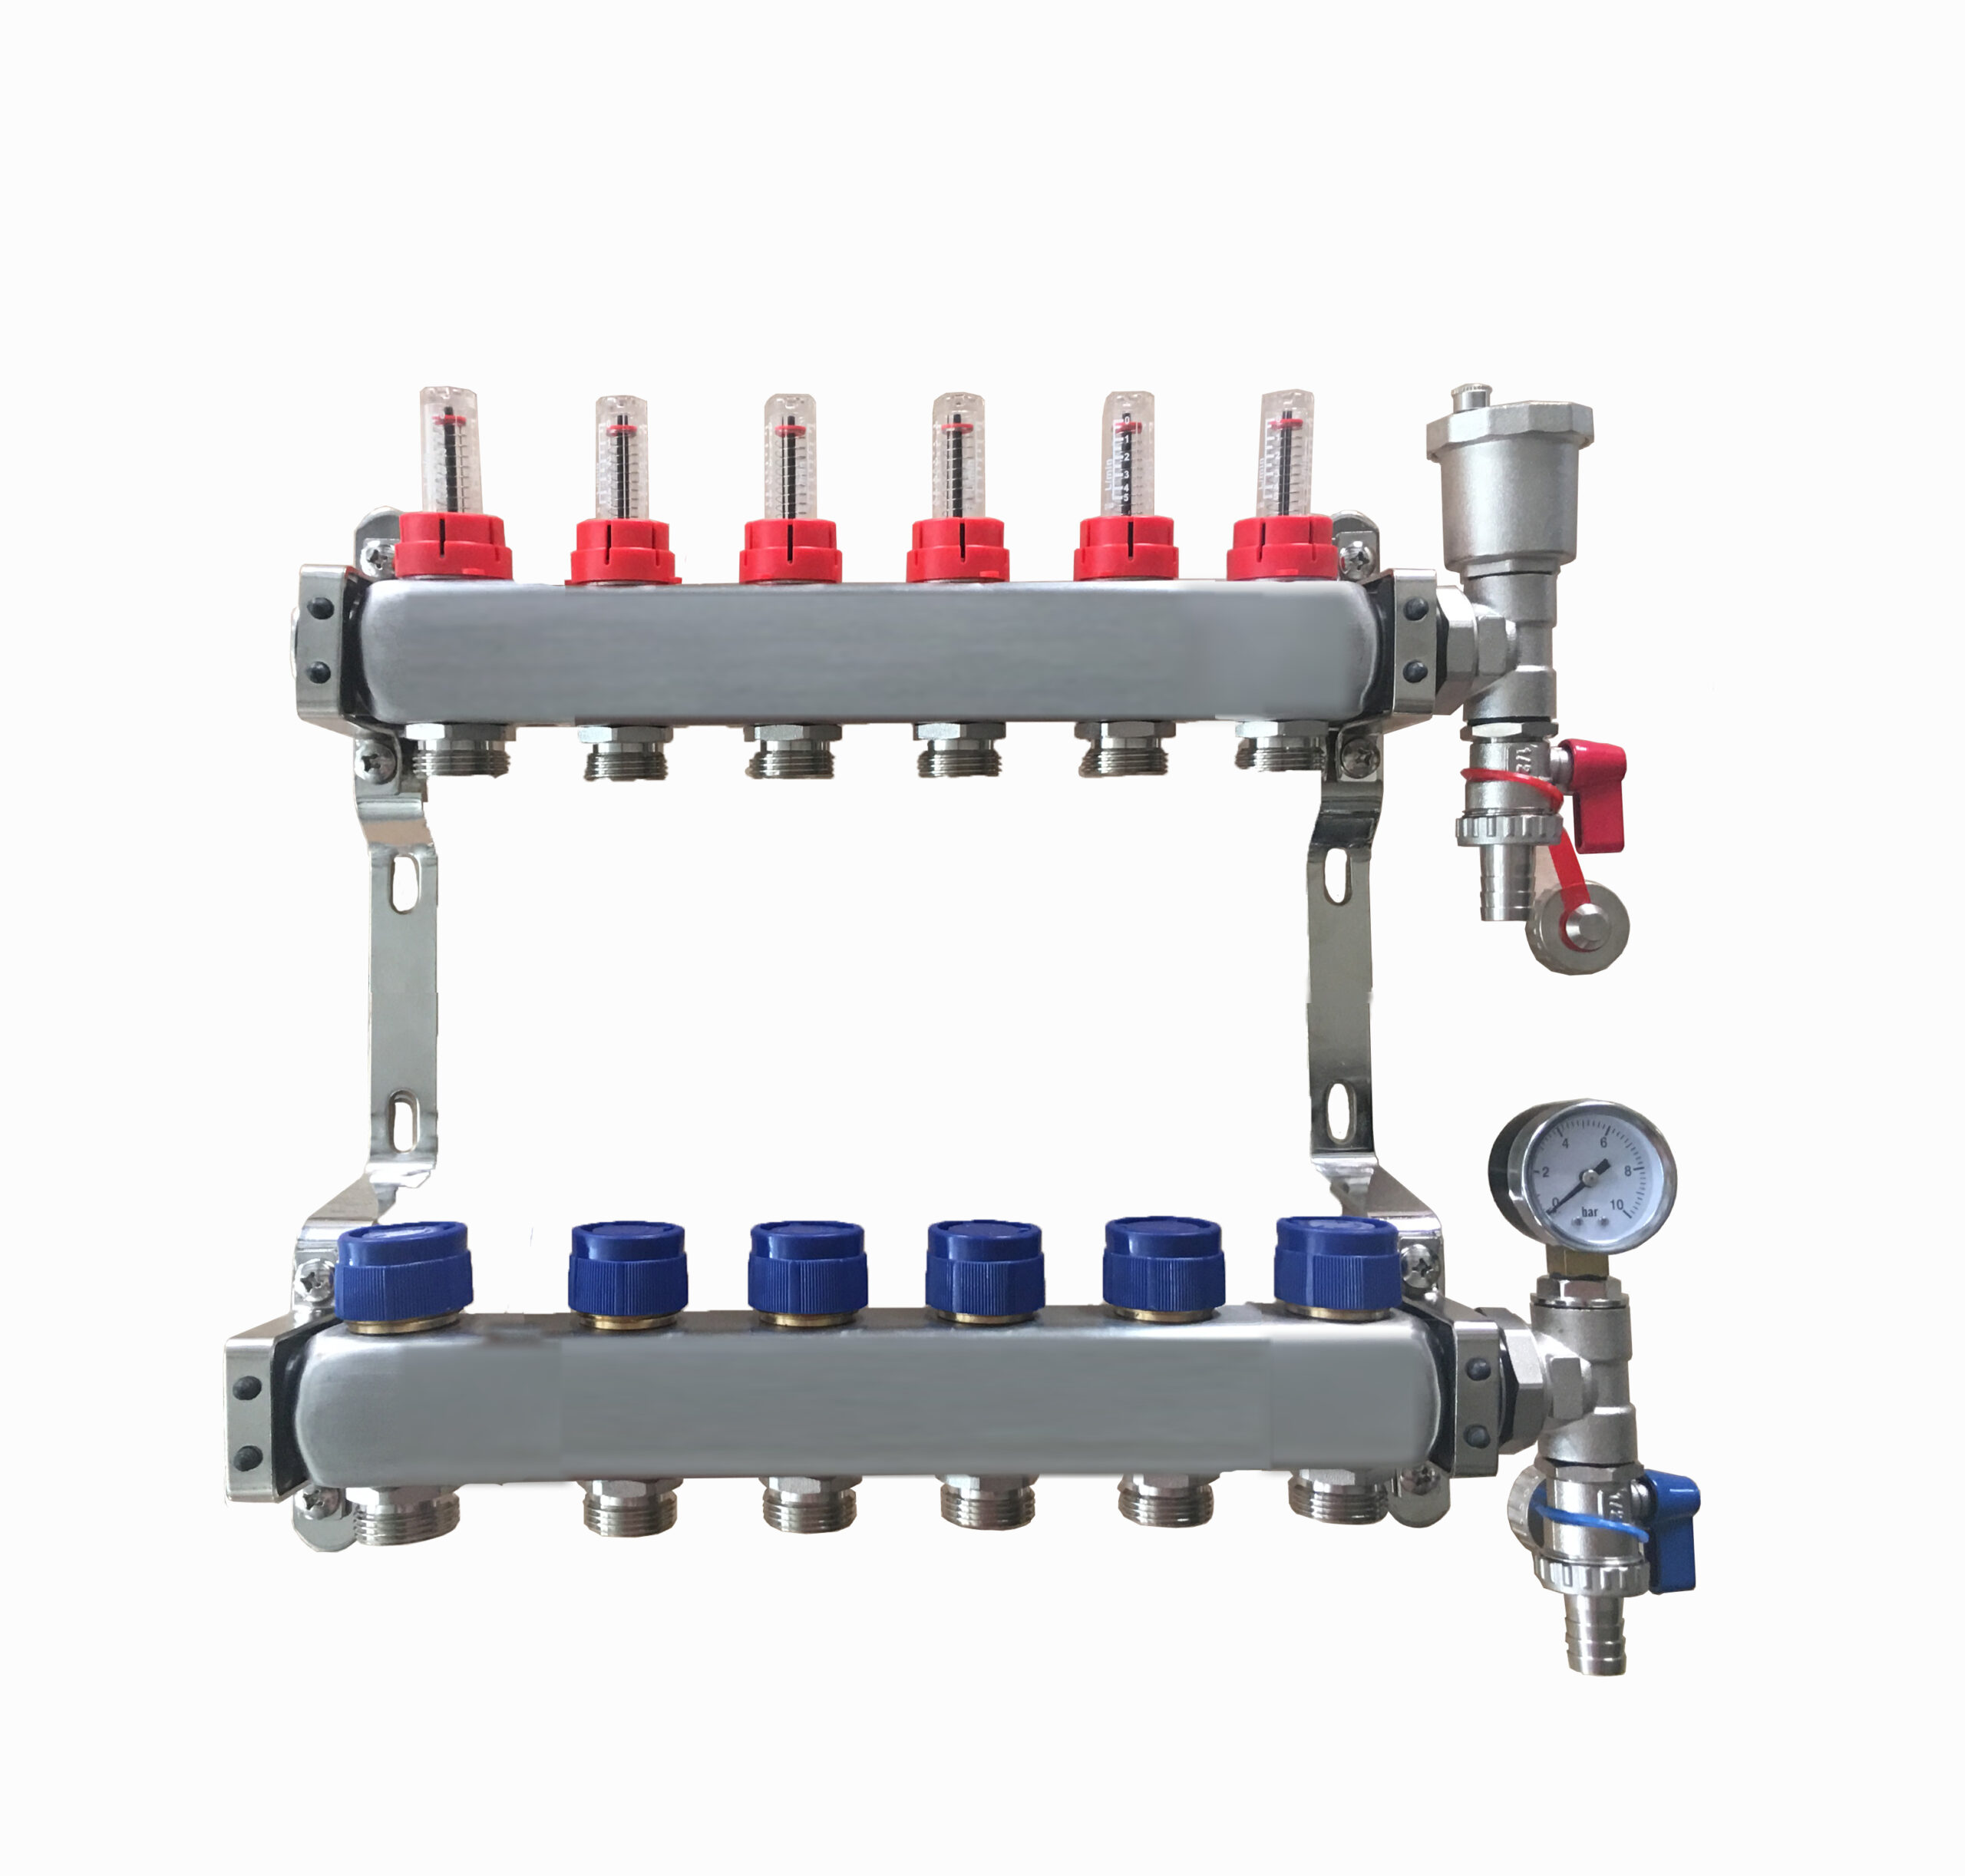 6 Port stainless steel manifold for underfloor Heating System